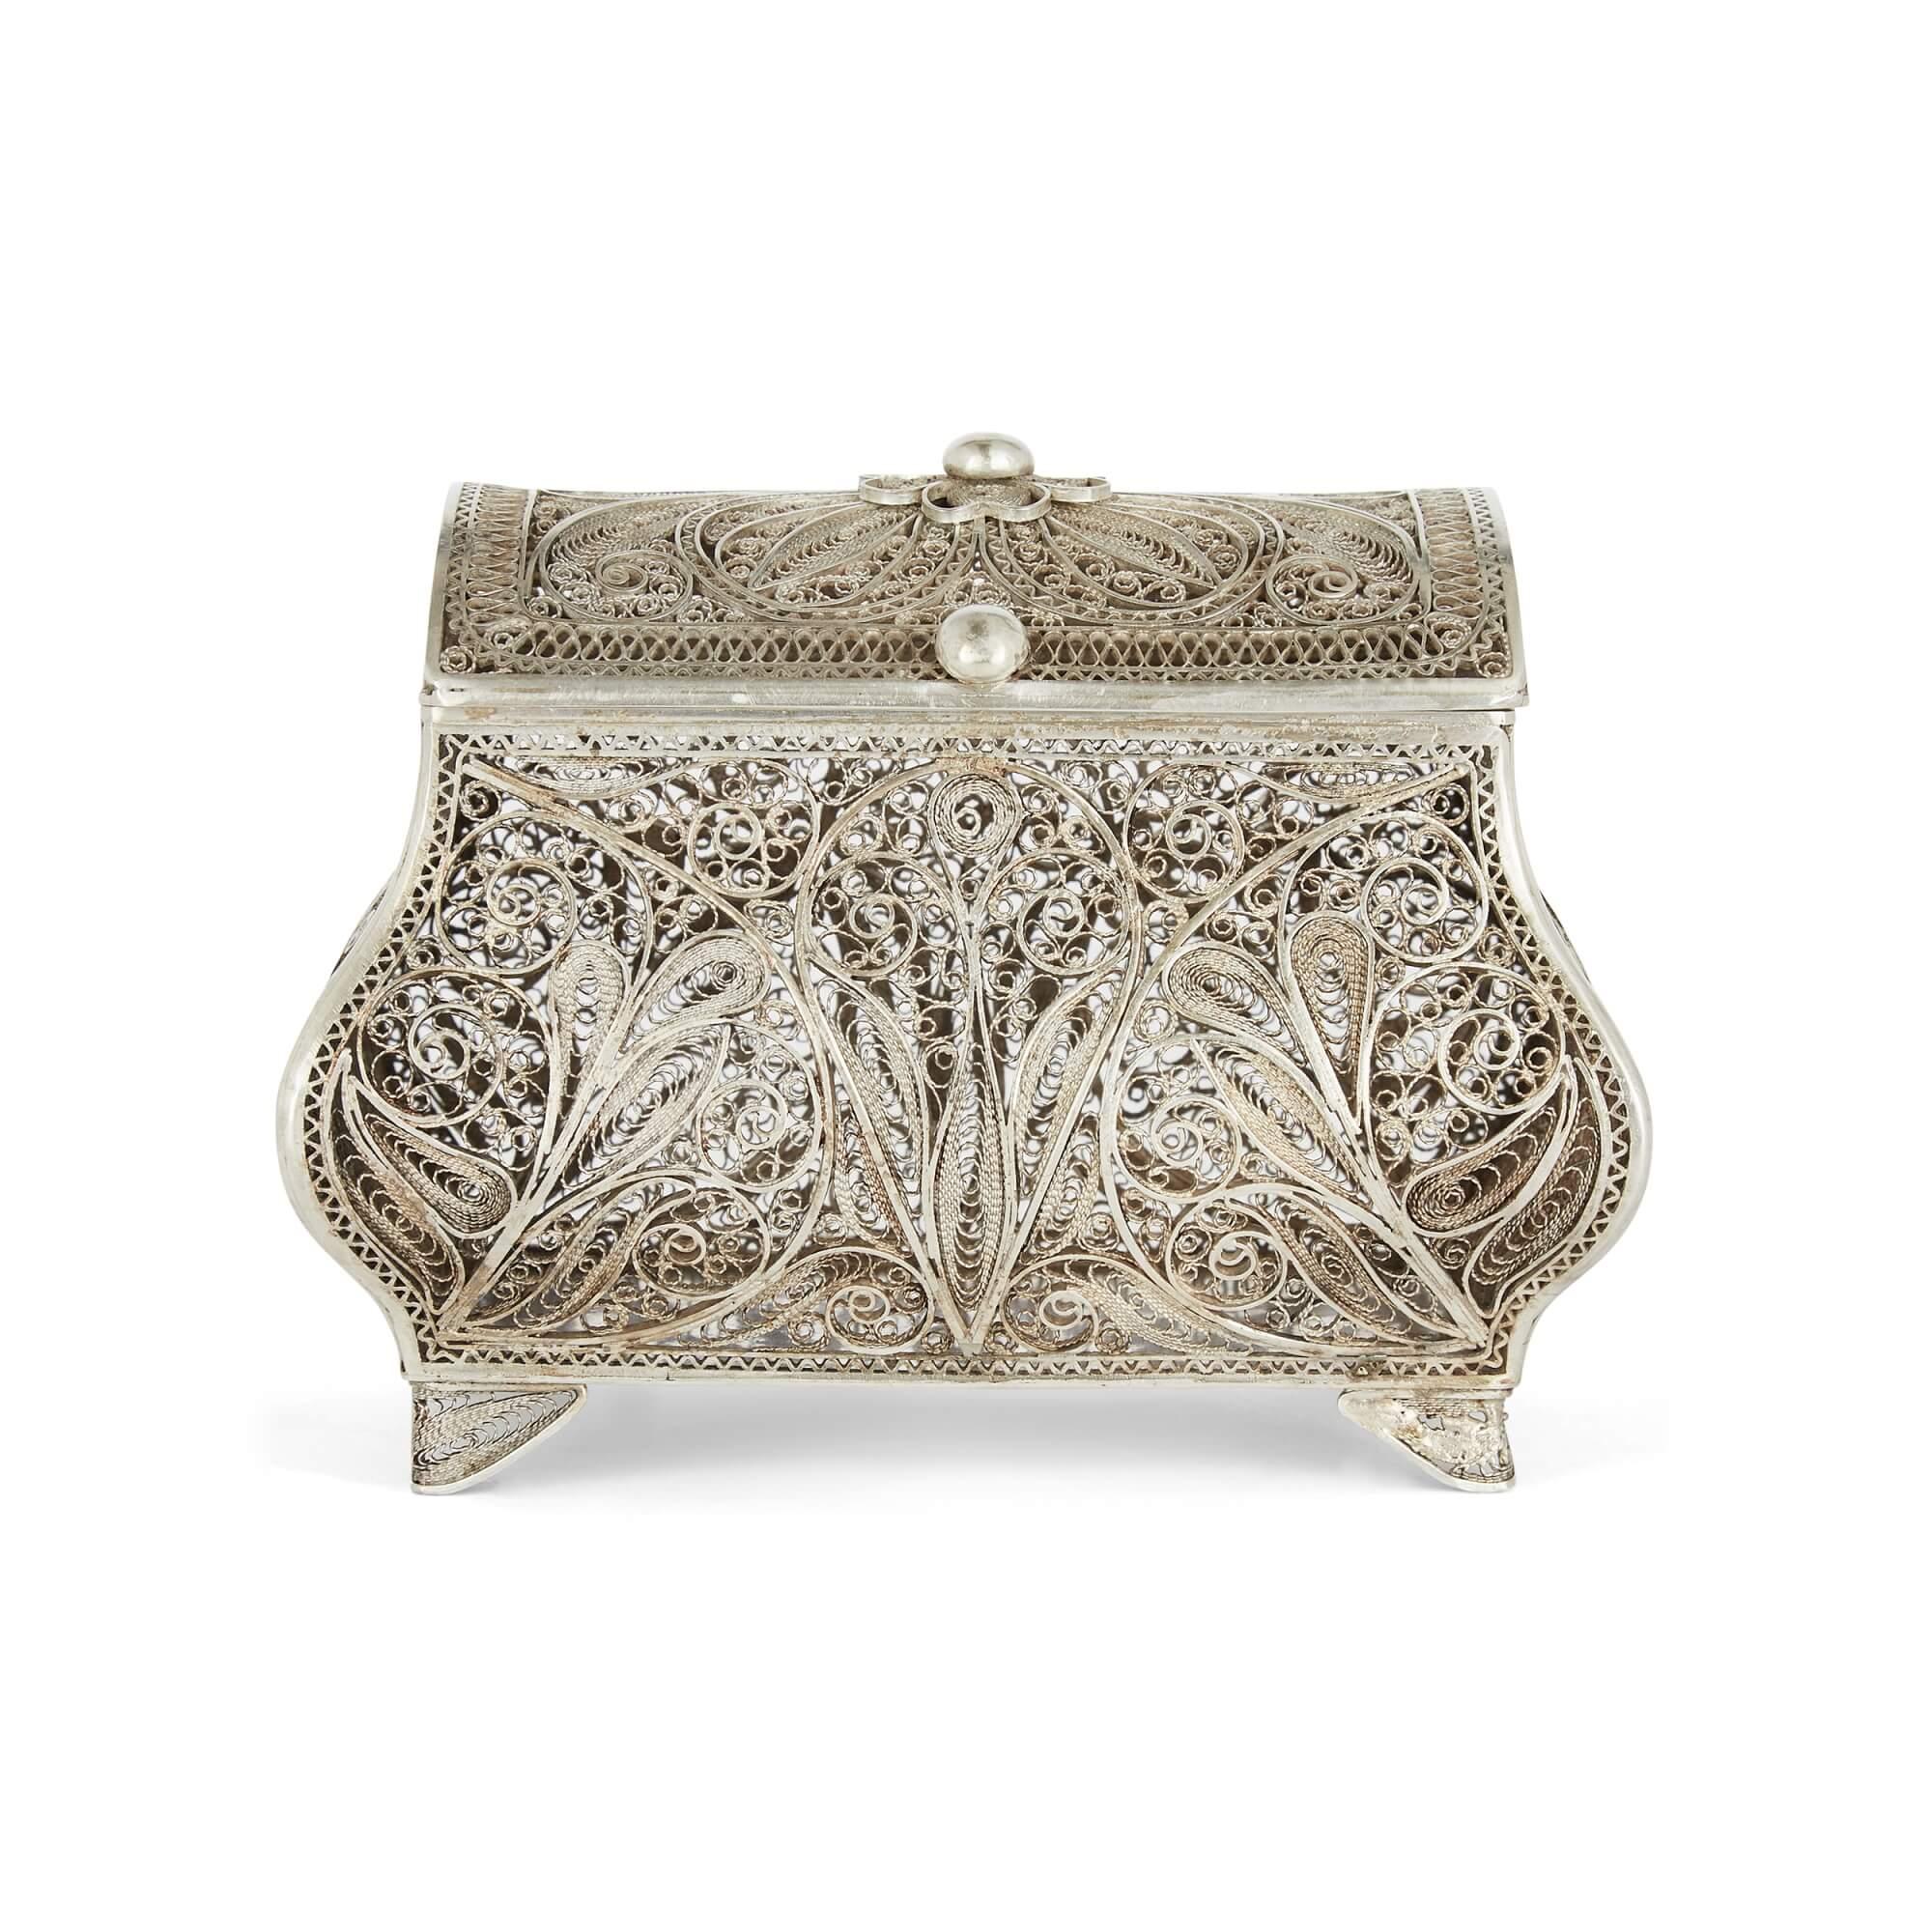 A continental silver filigree decorative flower box
Continental, Early 20th Century
10cm high x 11cm wide x 7cm deep.

This delicate and charming piece, crafted from silver filigree, is as much a jewel in its own right as it is a box for